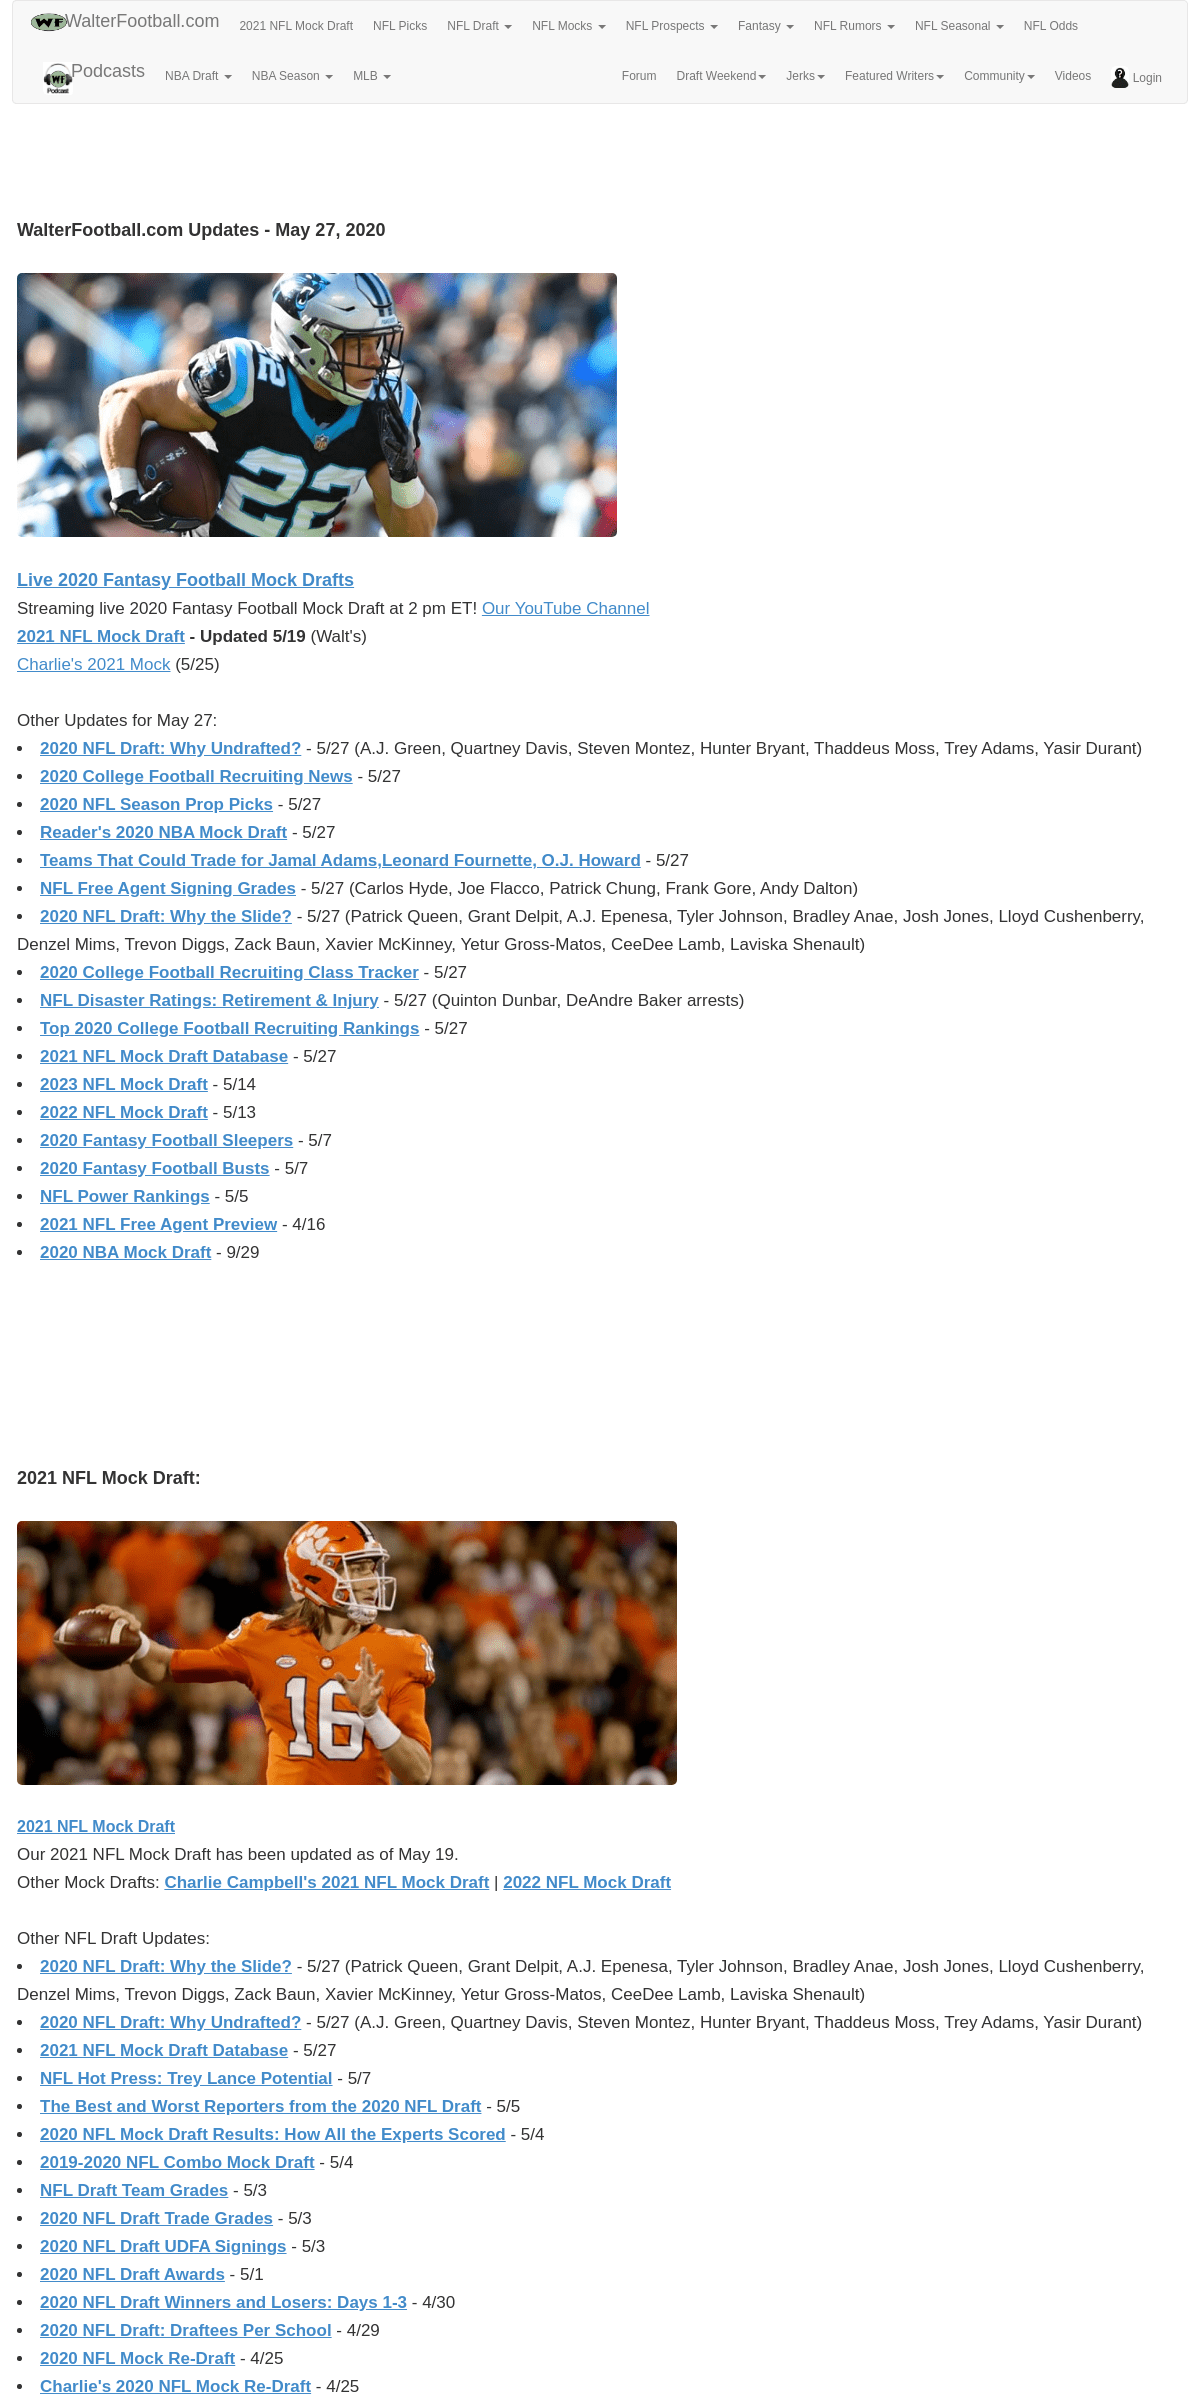 A complete backup of walterfootball.com